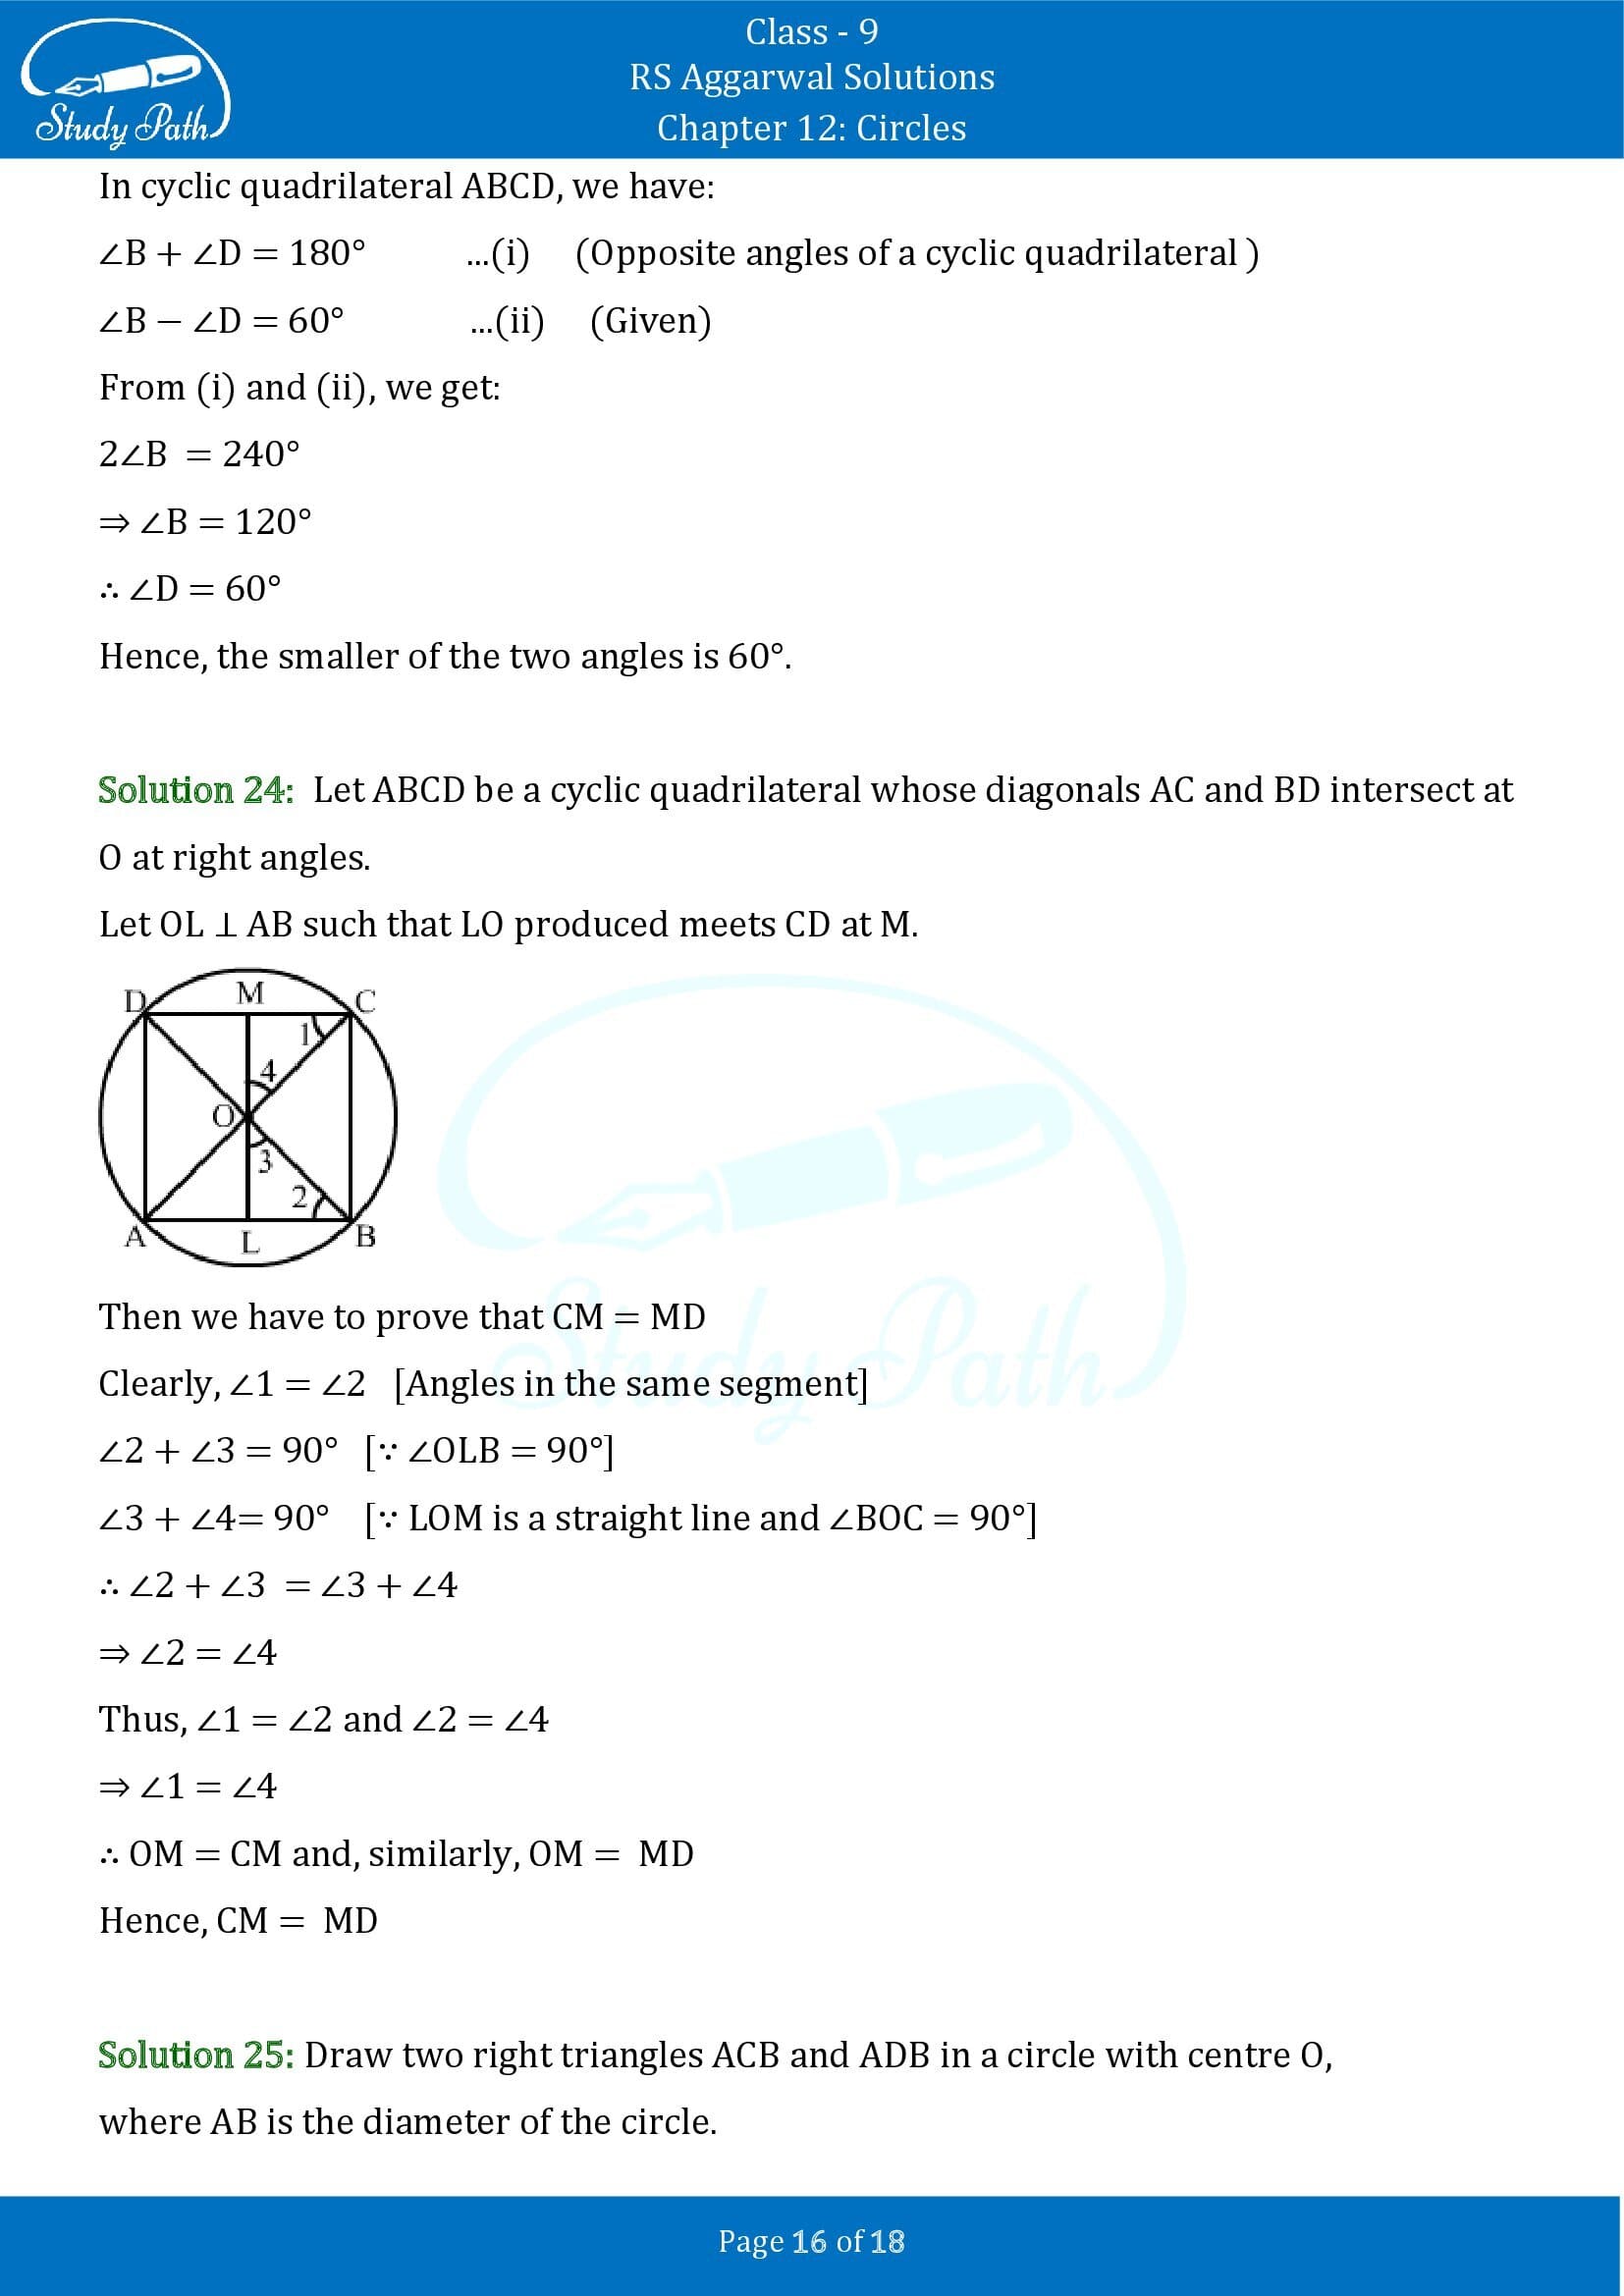 RS Aggarwal Solutions Class 9 Chapter 12 Circles Exercise 12C 00016